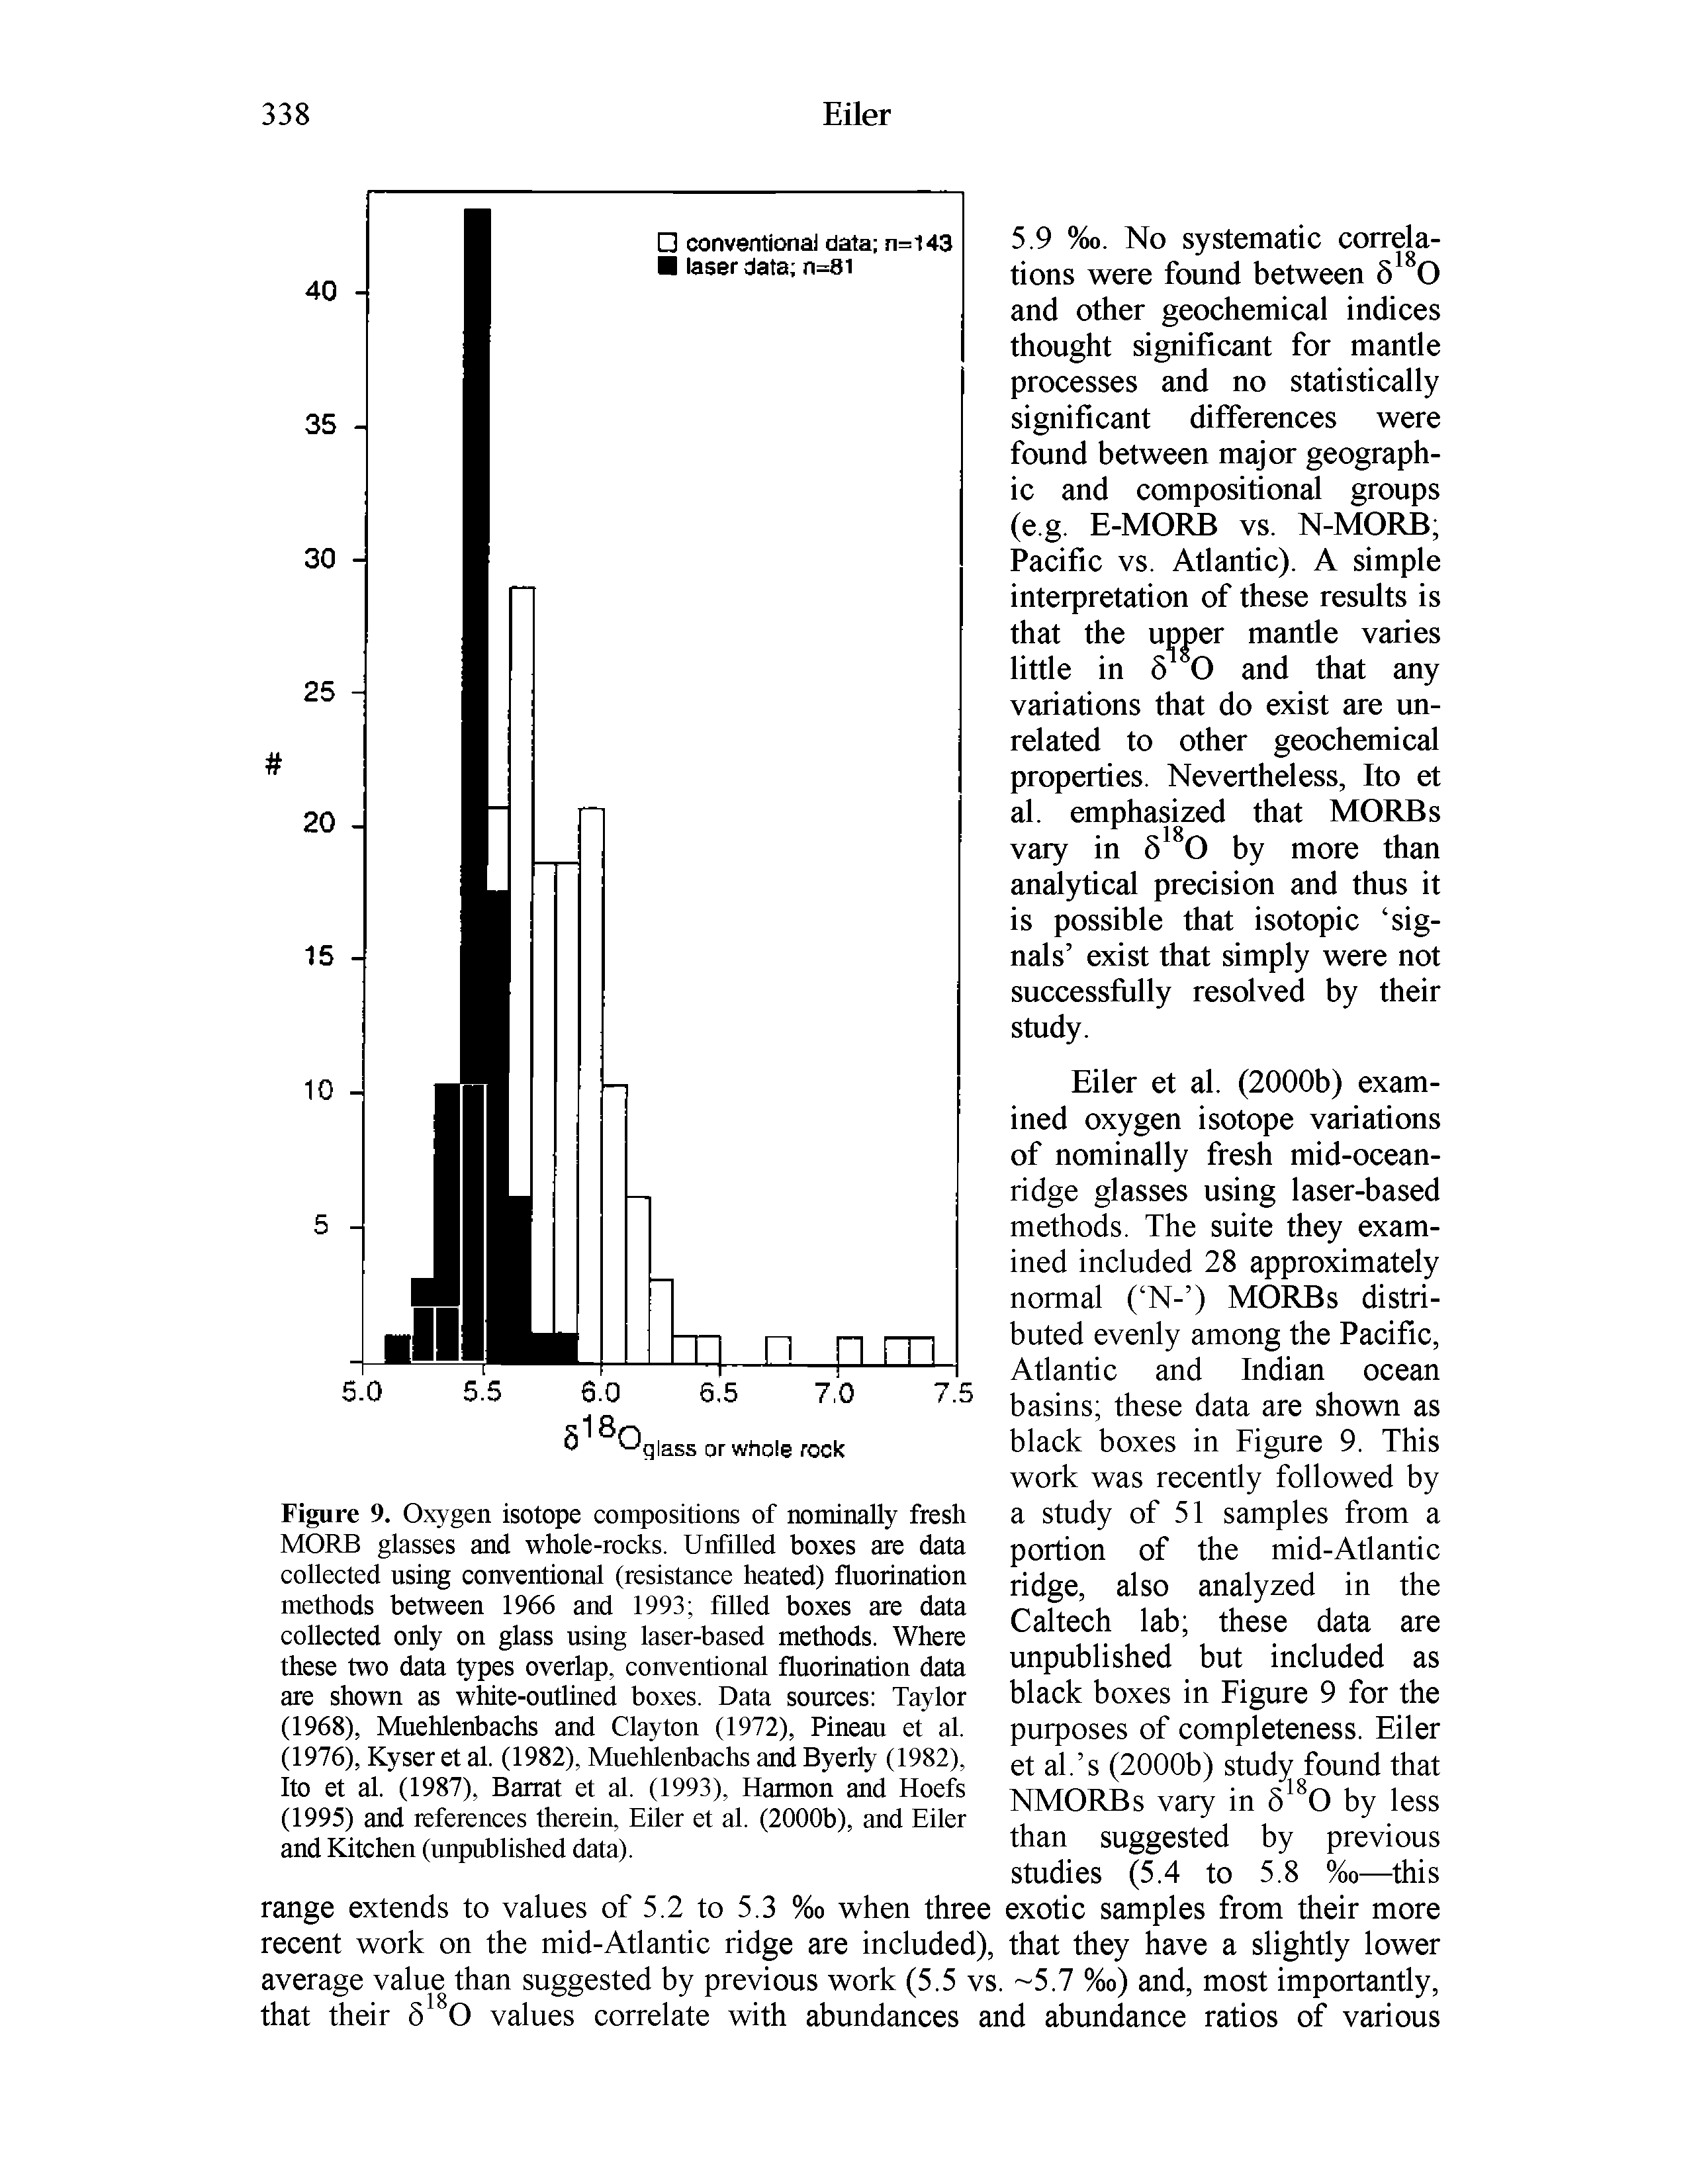 Figure 9. Oxygen isotope compositions of nominally fresh MORE glasses and whole-rocks. Unfilled boxes are data collected using conventional (resistance heated) fluorination methods between 1966 and 1993 filled boxes are data collected only on glass using laser-based methods. Where these two data types overlap, conventional fluorination data are shown as white-outlined boxes. Data sources Taylor (1968), Muehlenbachs and Clayton (1972), Pineau et al. (1976), Kyser et al. (1982), Muehlenbachs and Byerly (1982), Ito et al. (1987), Barrat et al. (1993), Harmon and Hoefs (1995) and references therein, Eiler et al. (2000b), and Eiler and Kitchen (unpublished data).